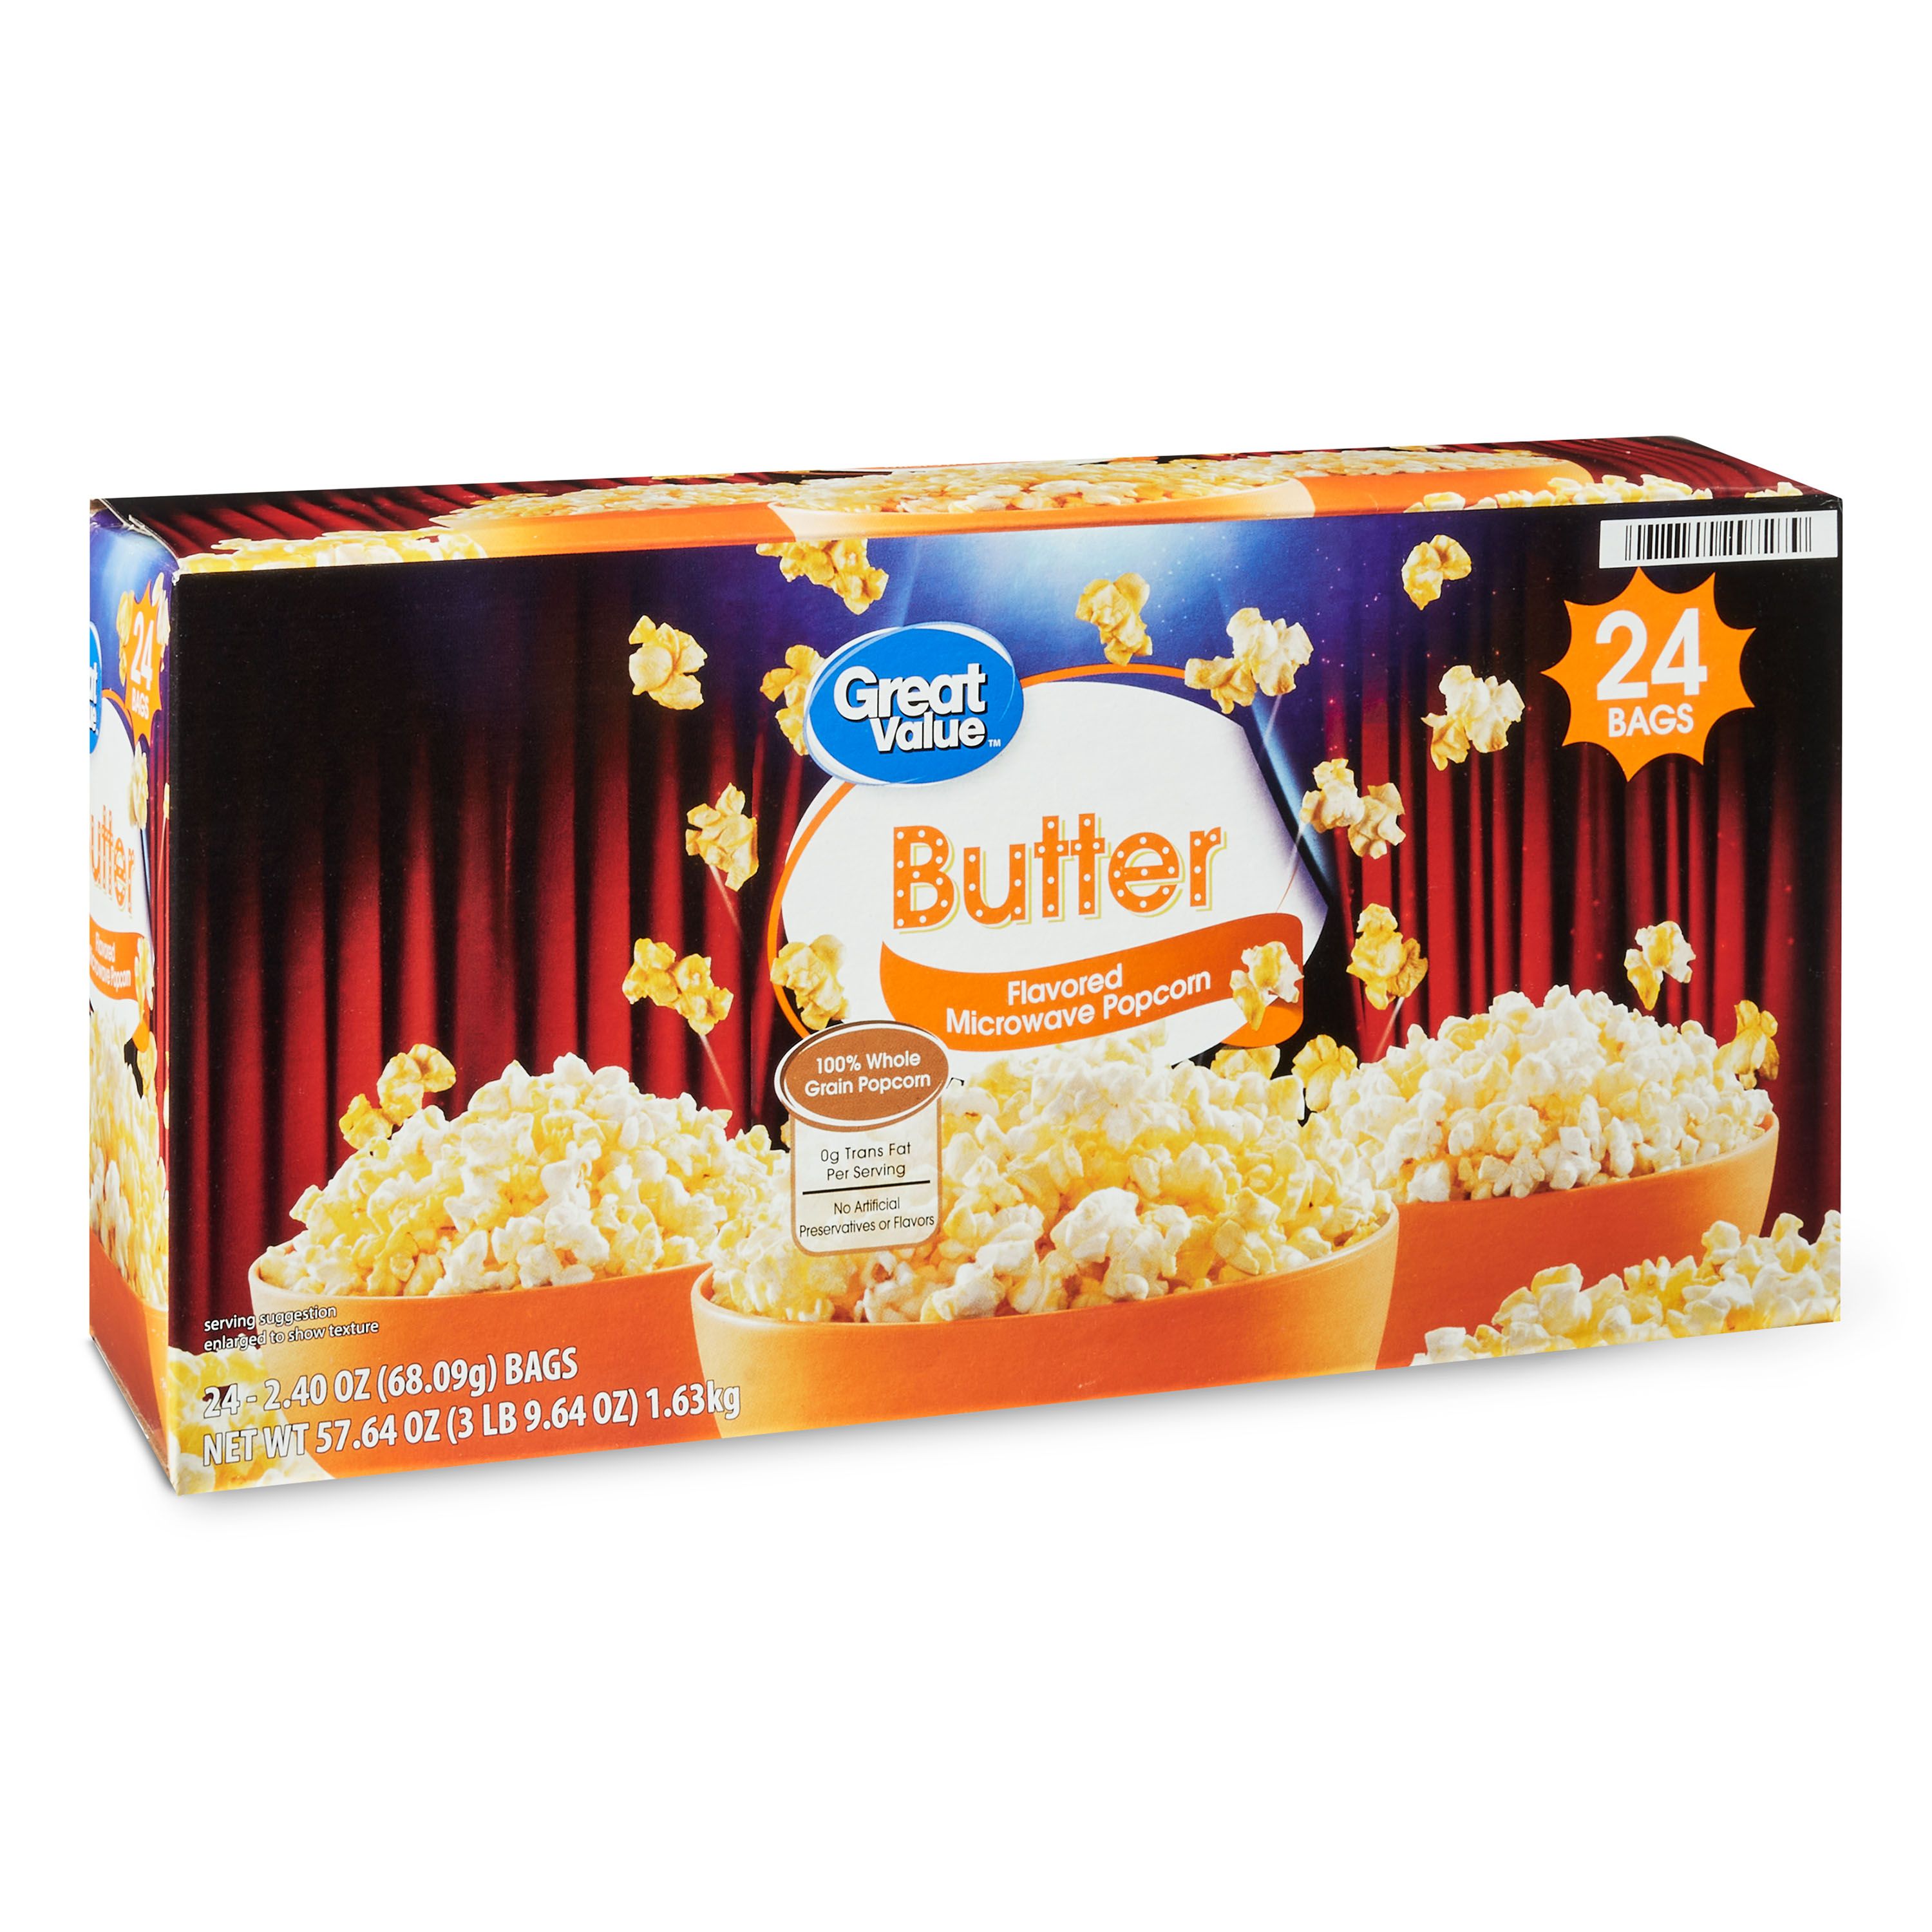 Great Value Butter Flavored Microwave Popcorn